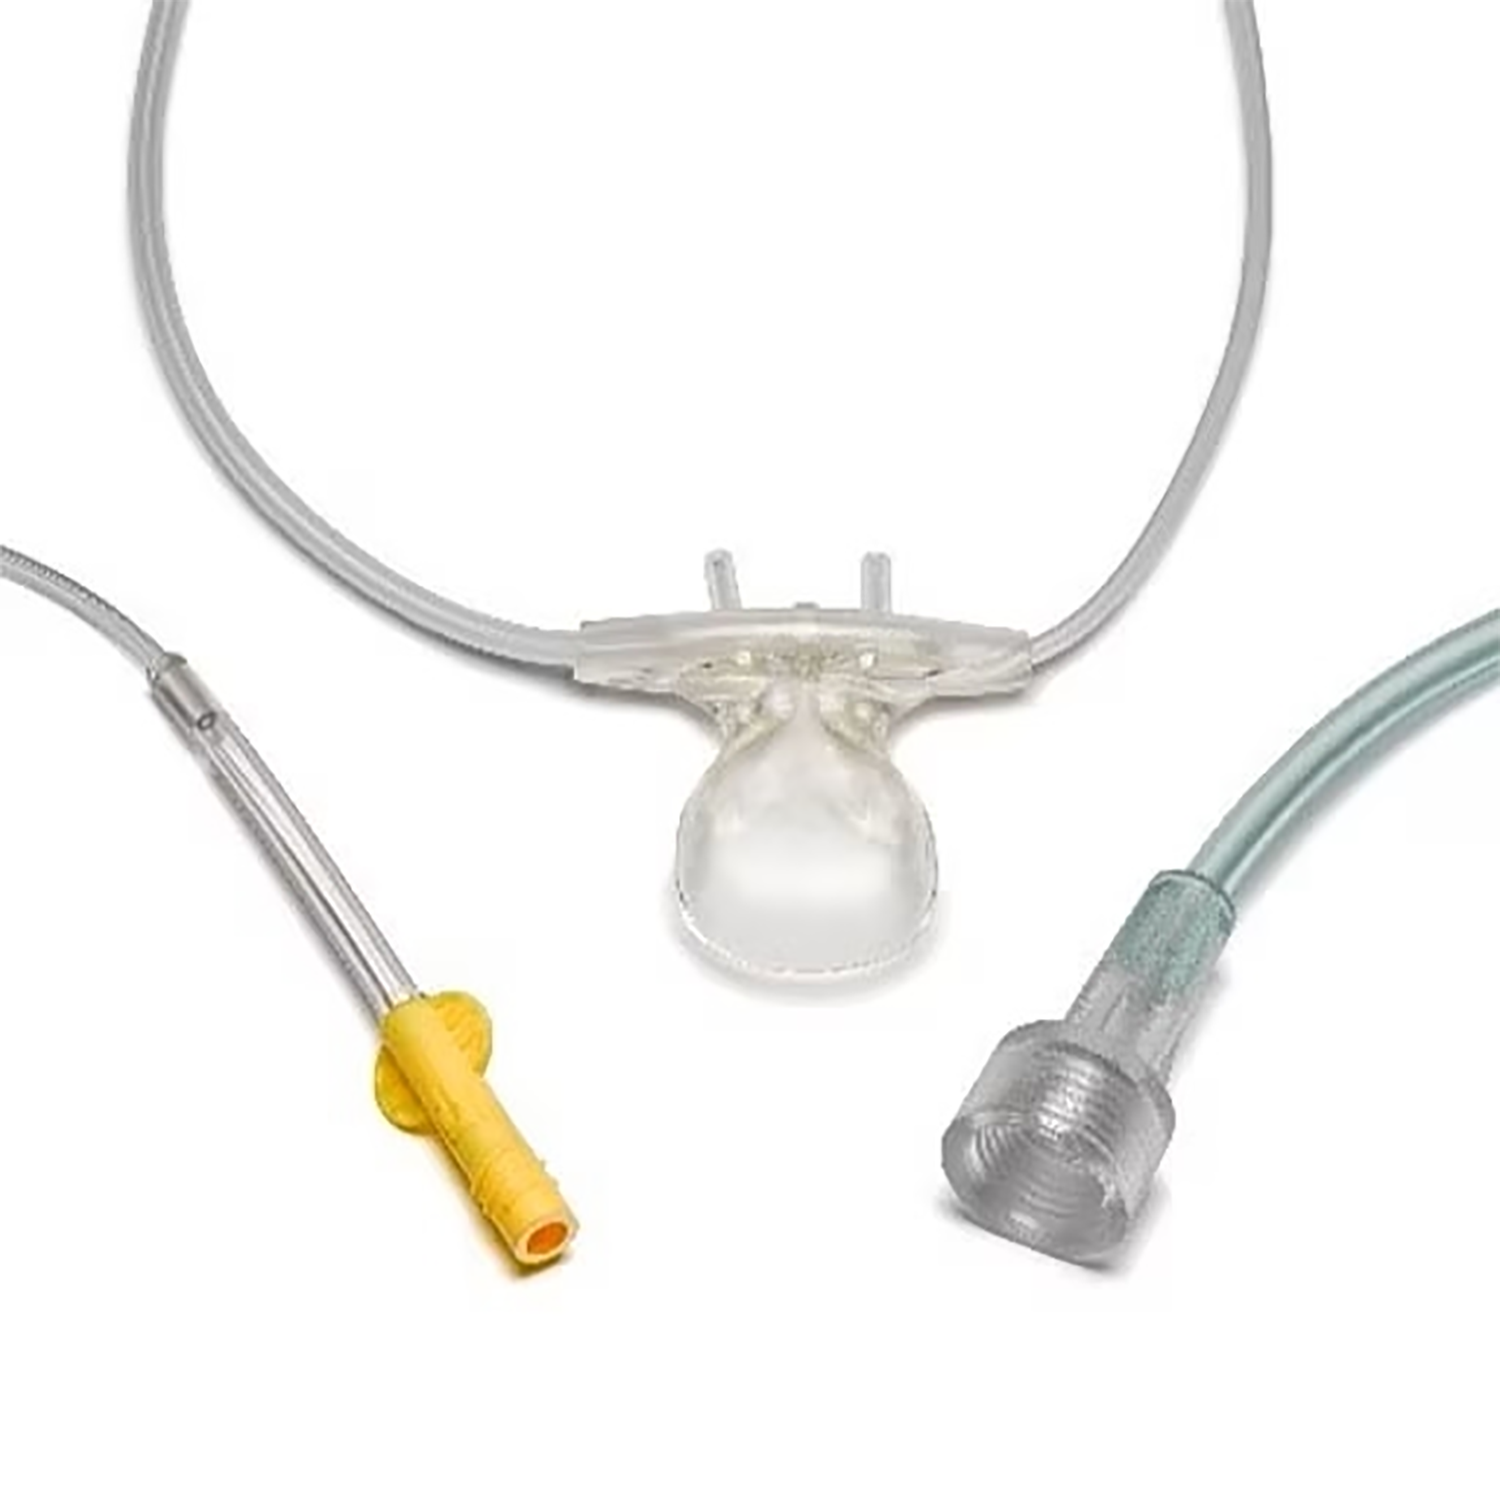 Microstream Advance Intubated Filter Line | Adult/Pediatric | Long | Pack of 25